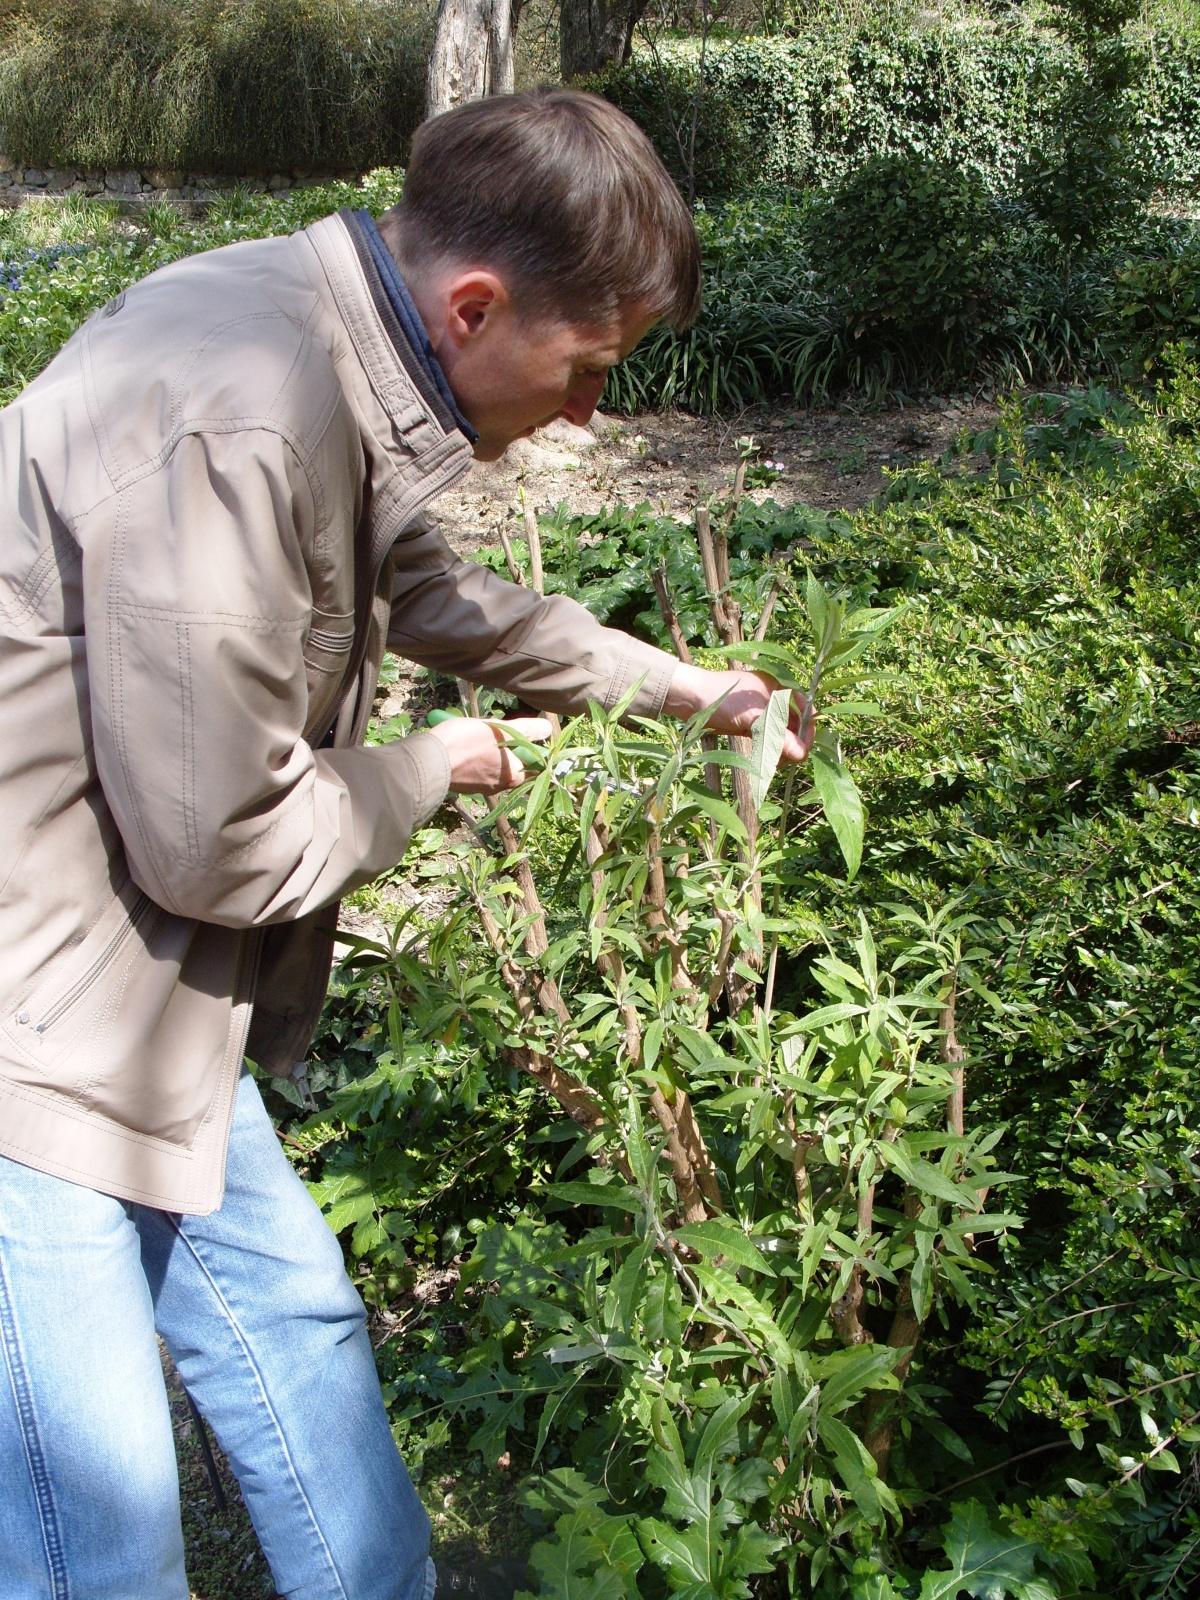 Features of Pruning Shrubs (part 1)